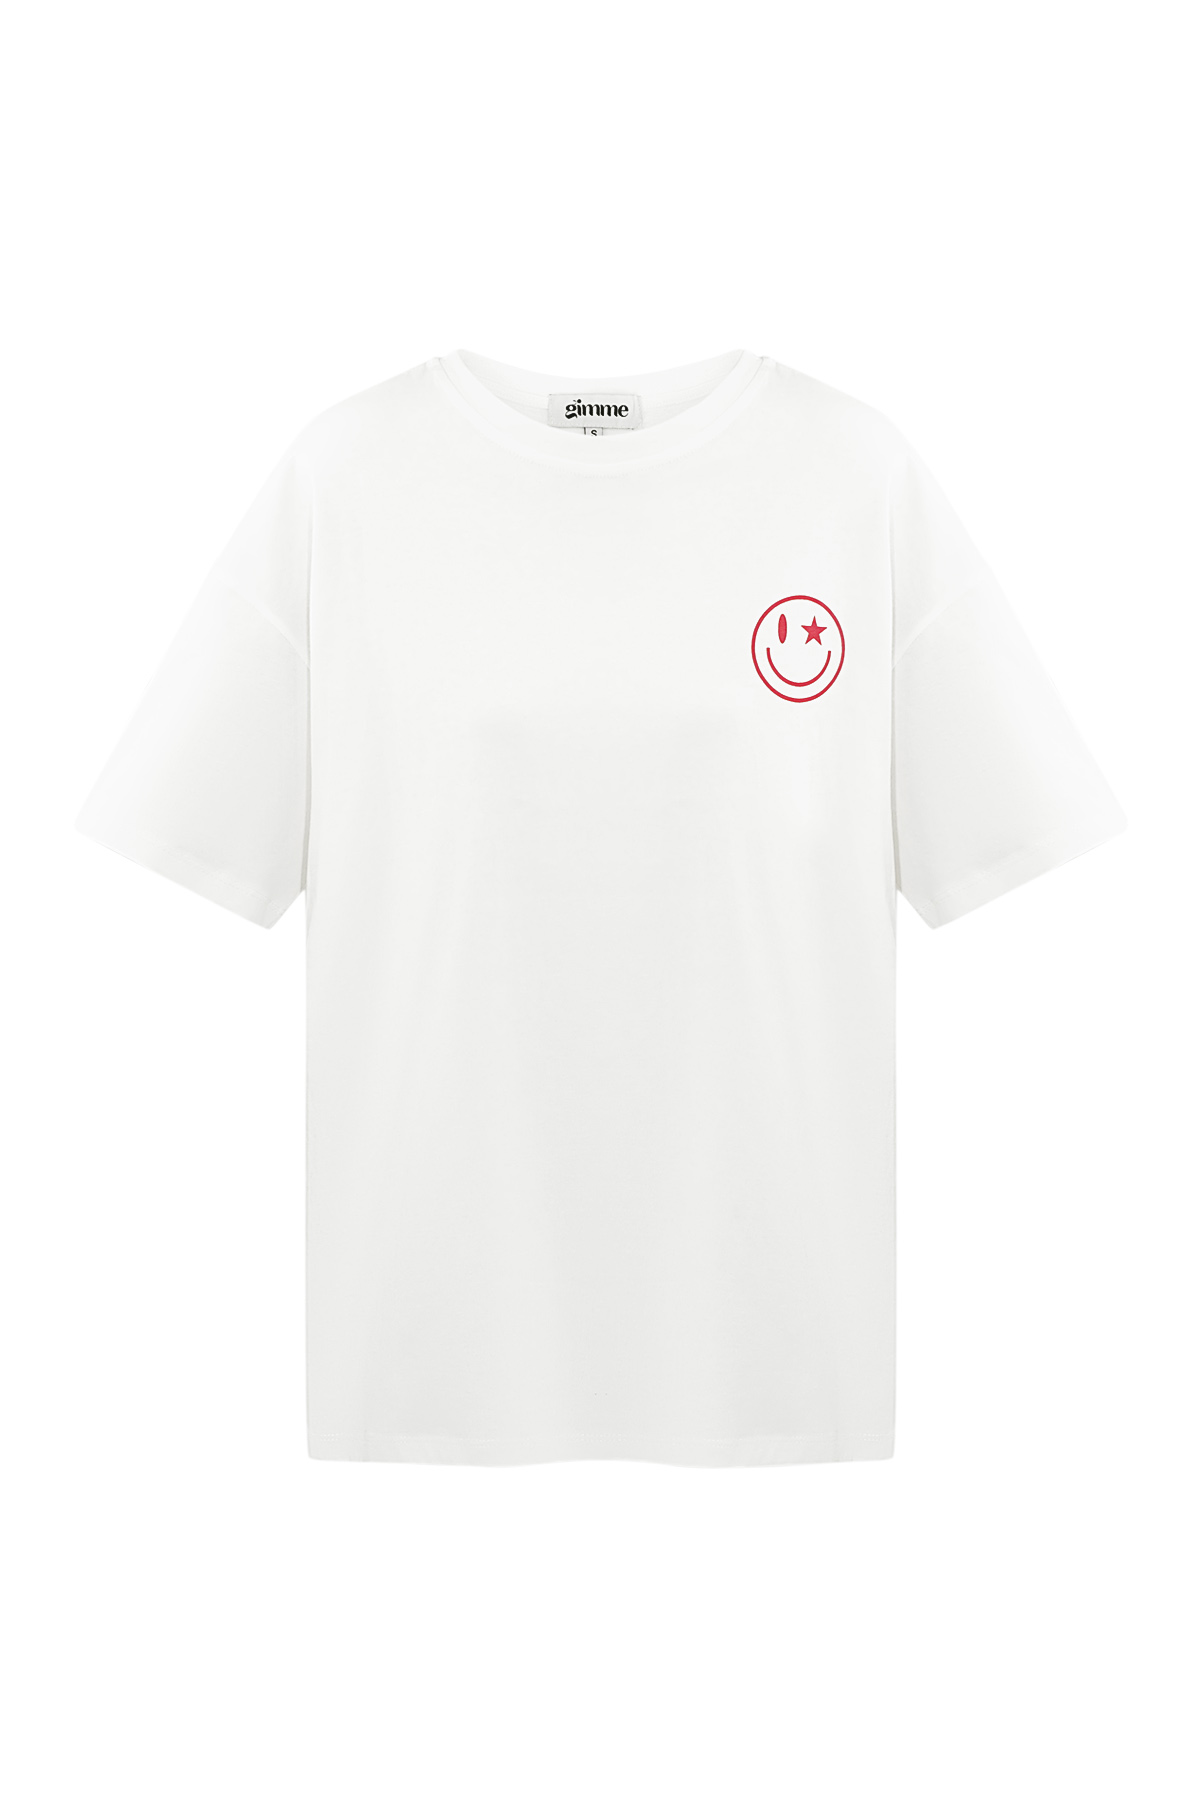 T-shirt happy life smiley - wit h5 